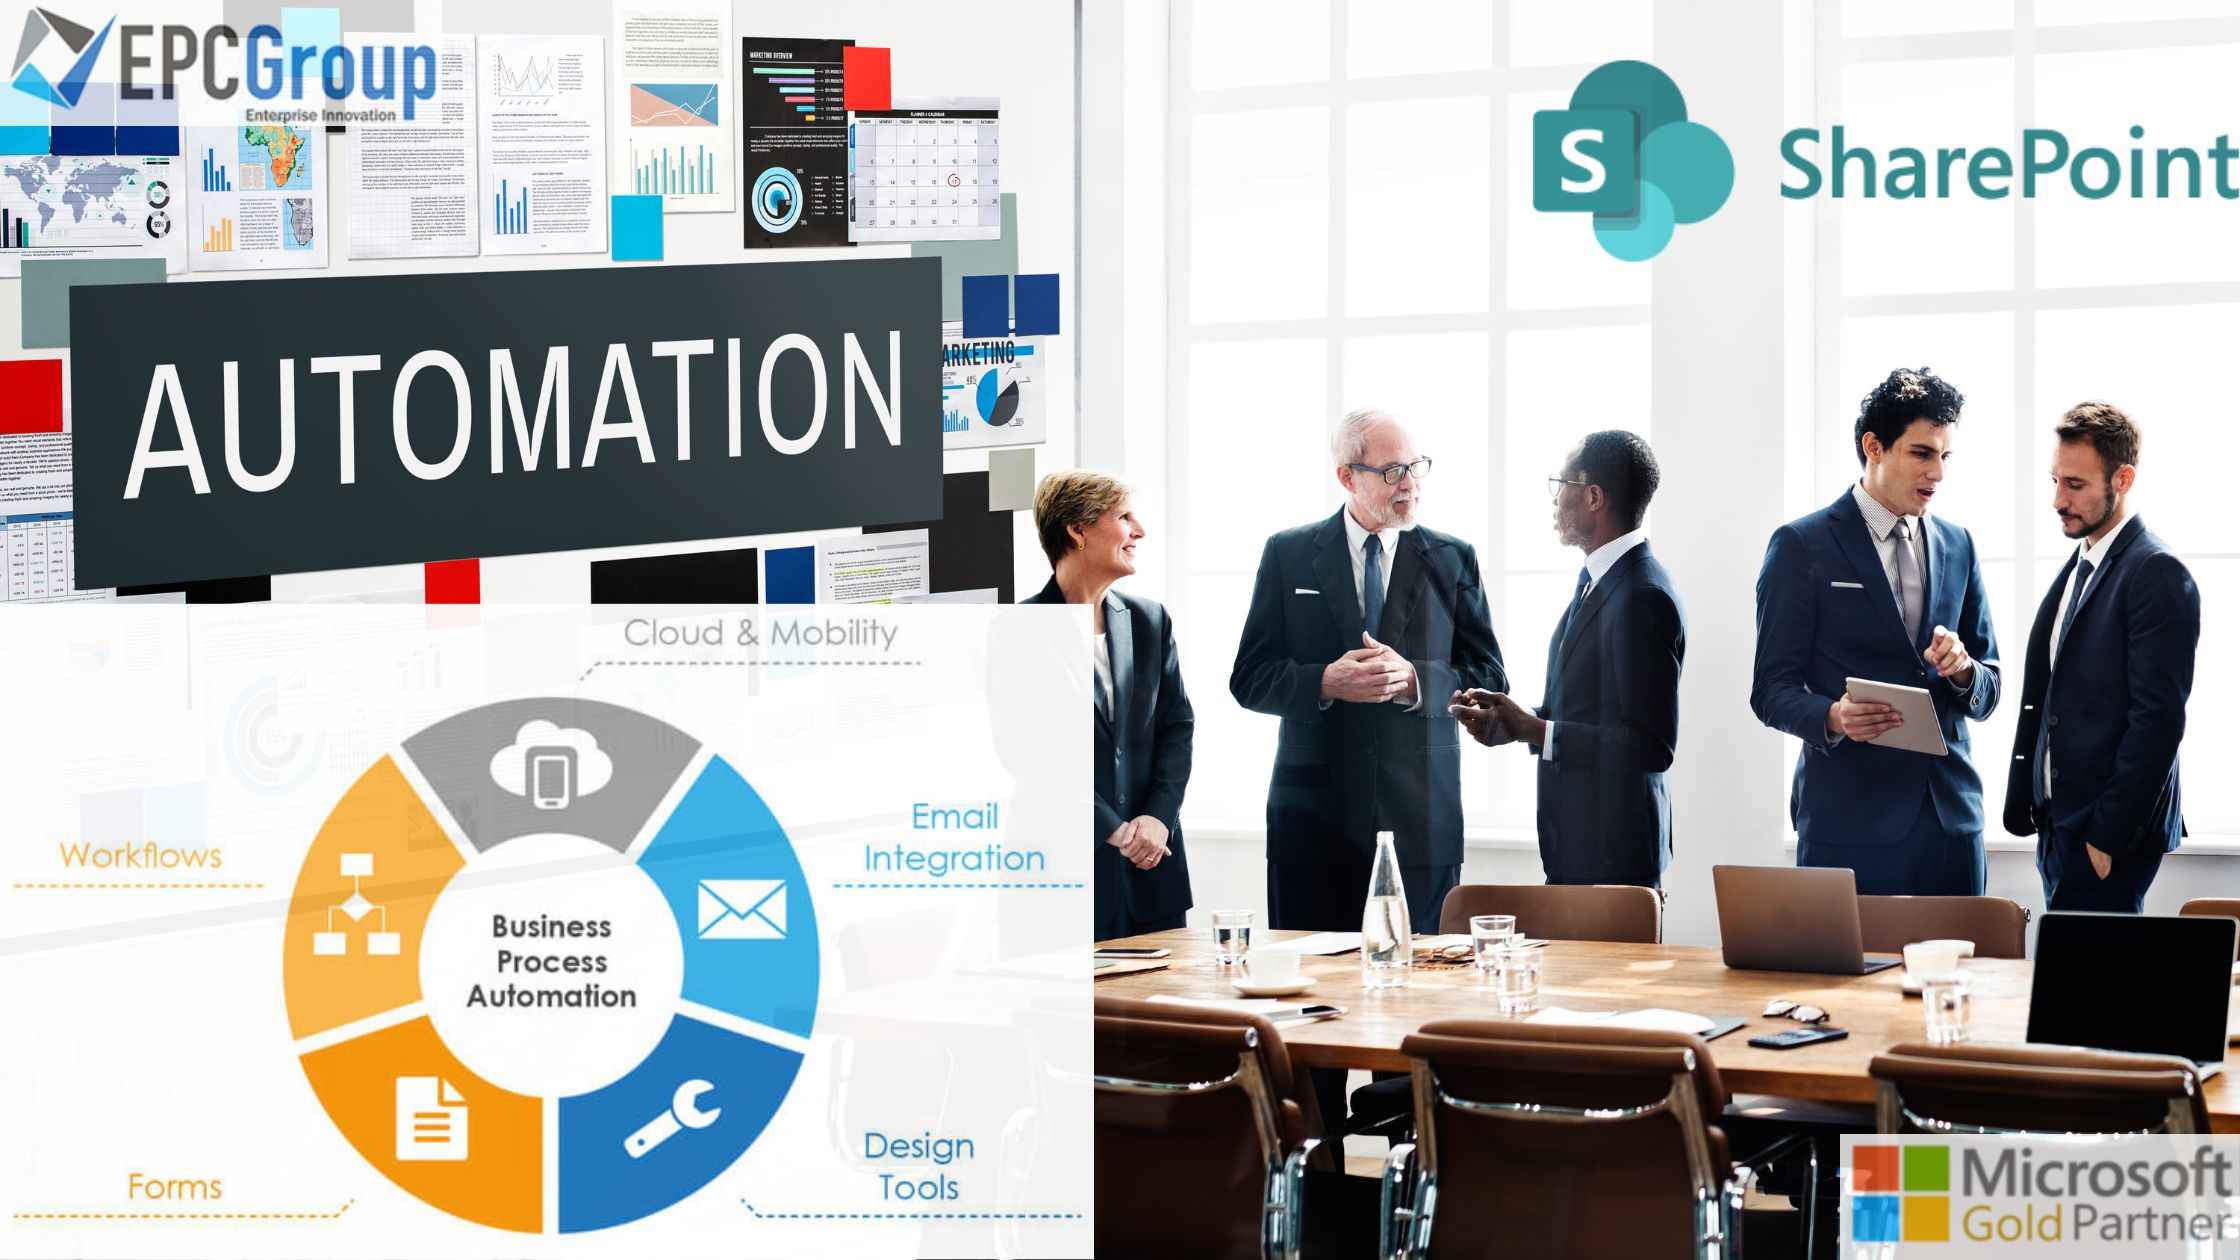 6 Benefits of SharePoint Business Process Automation